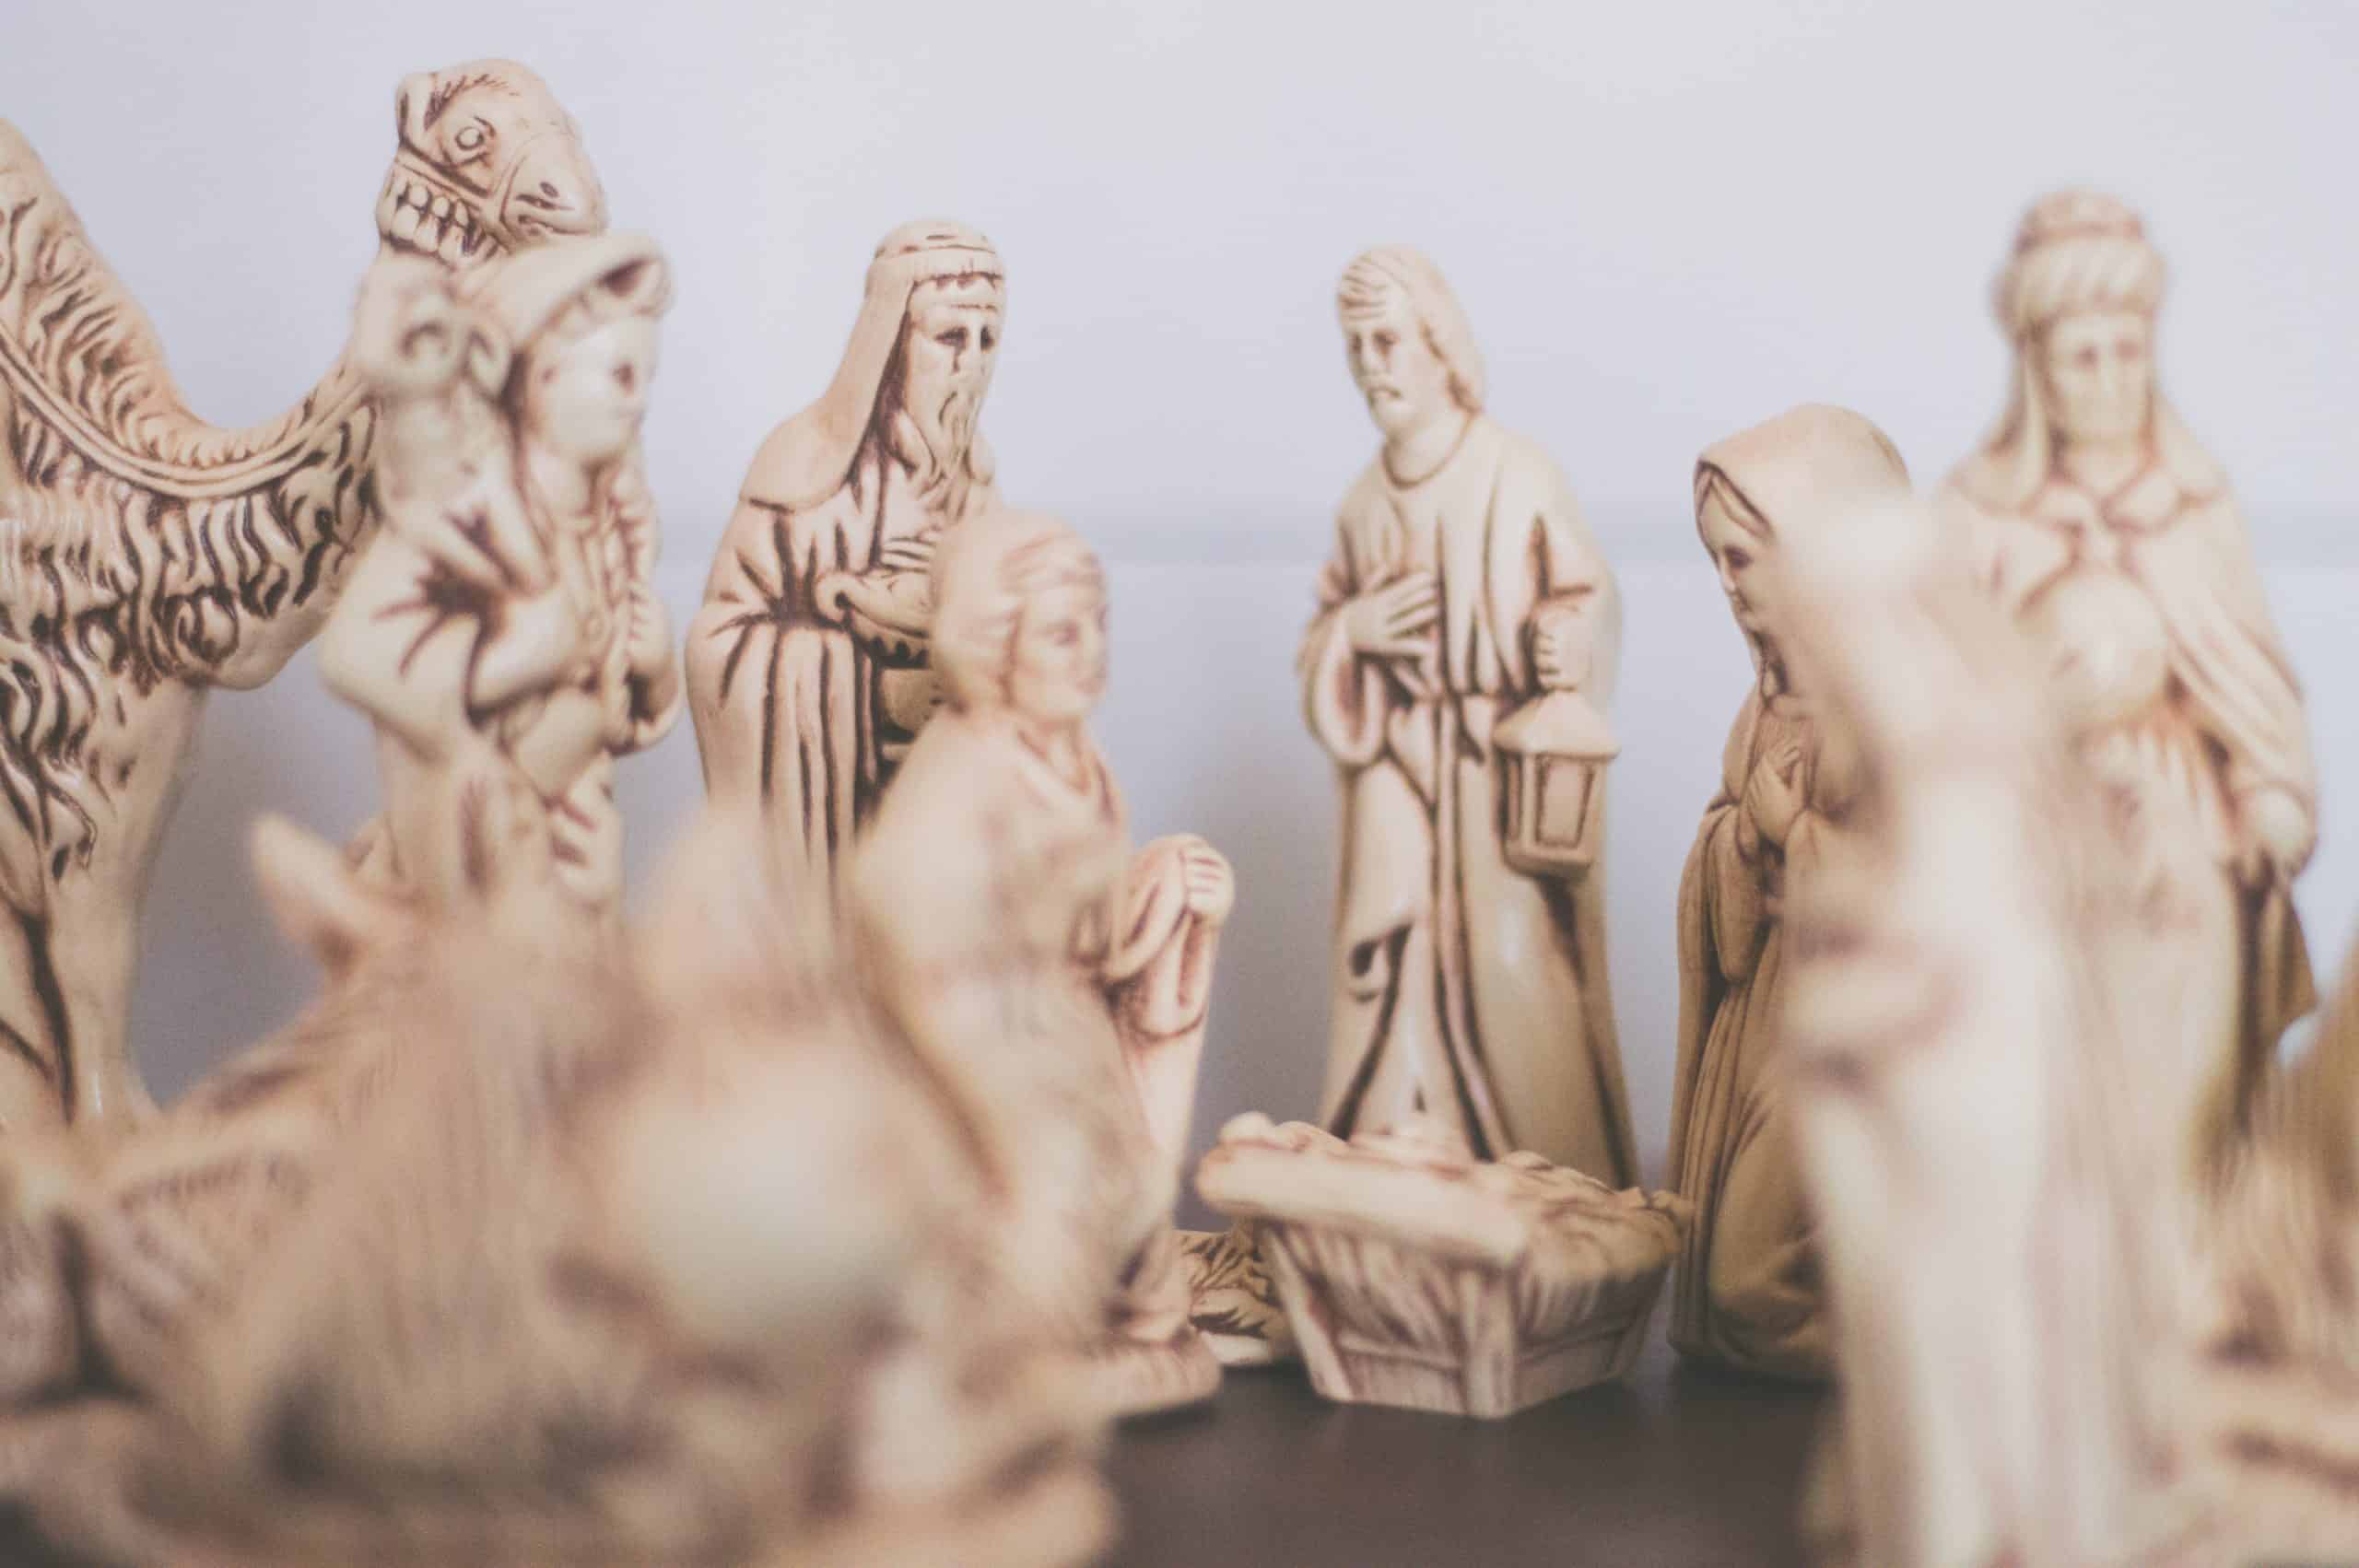 About Family Therapy, the Christmas Creche, and Being Molded Deeply Into God’s Divine Embrace